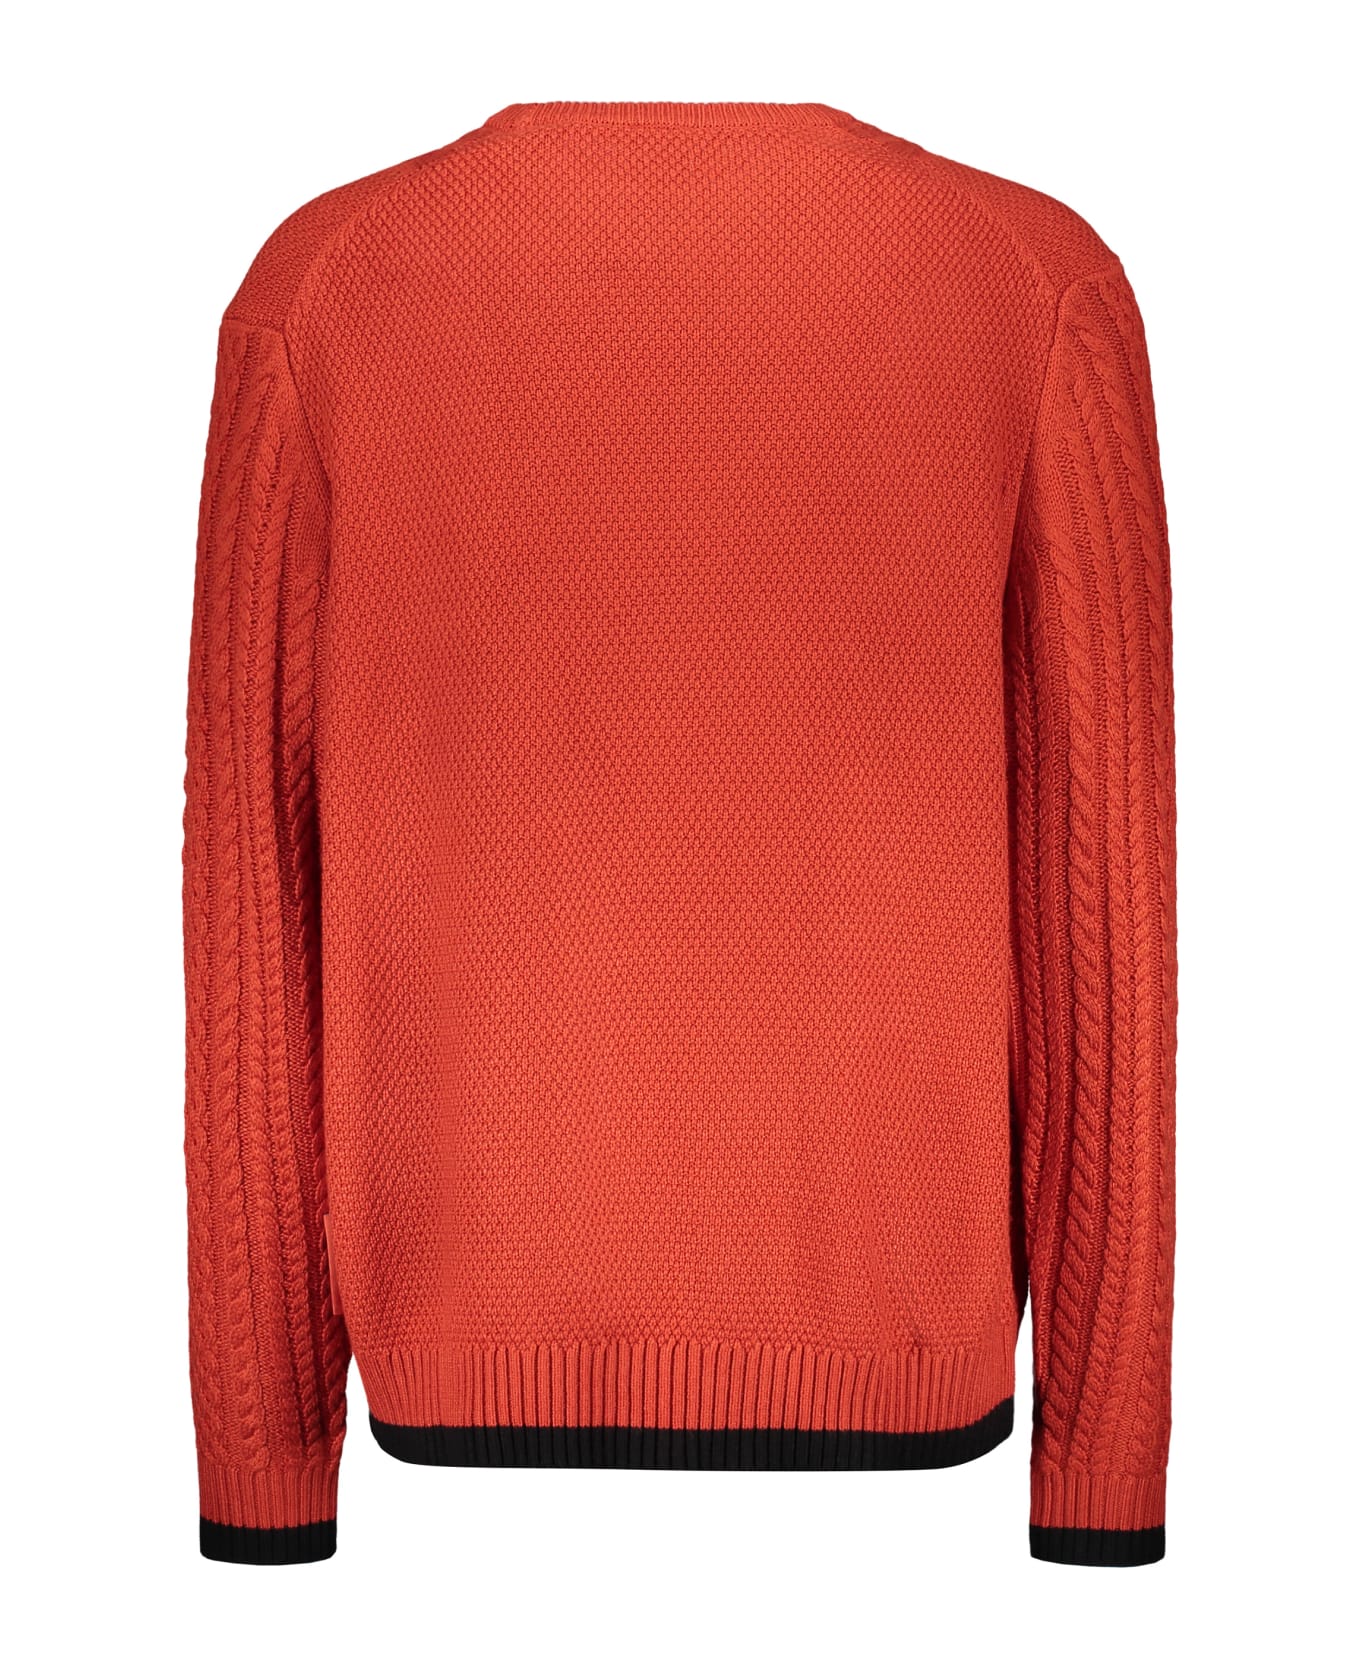 Armani Exchange Cable Knit Sweater - Copper